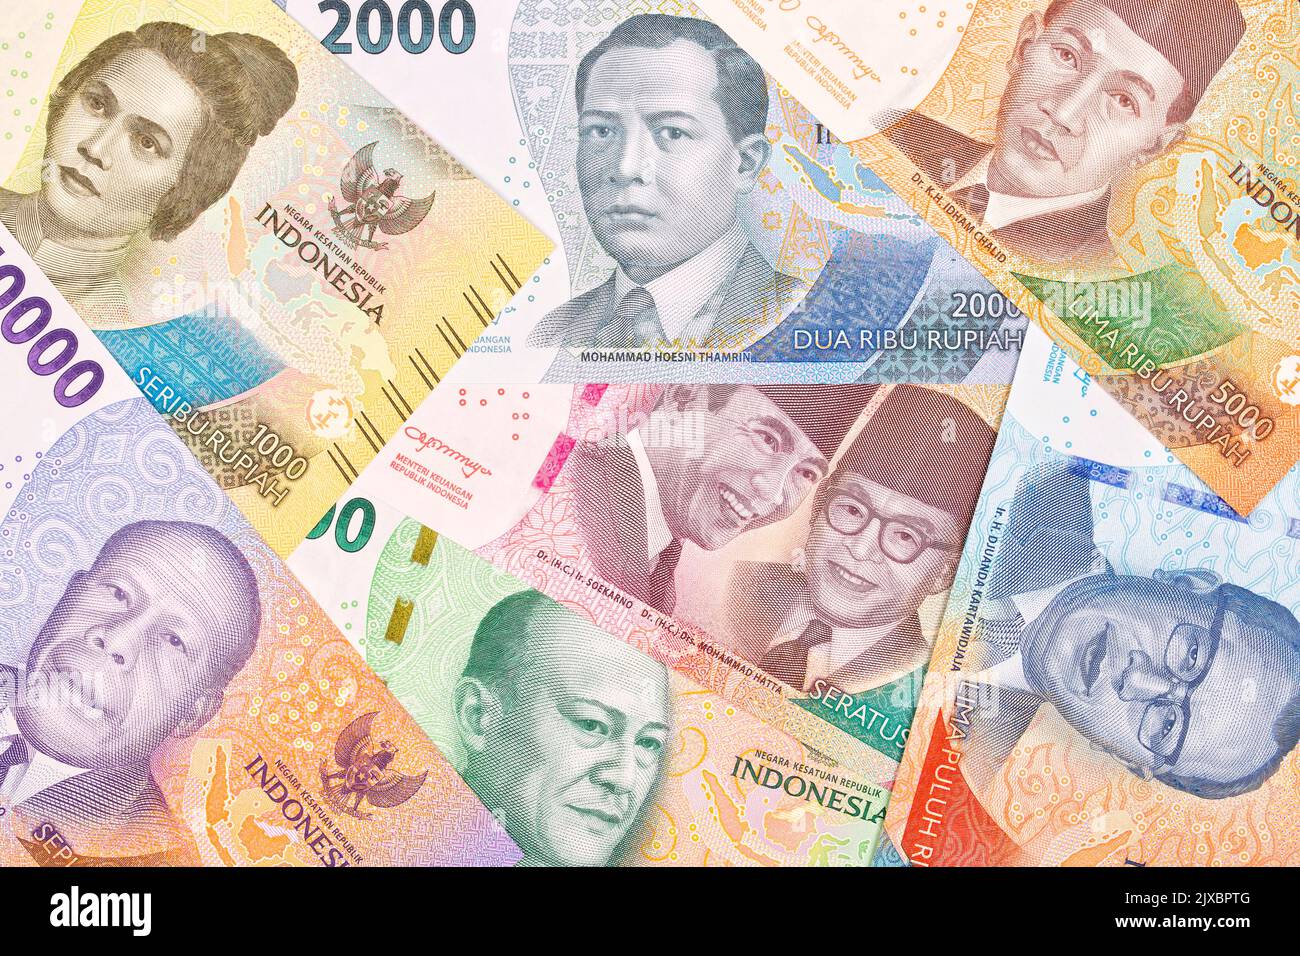 Indonesian money - new serie of banknotes Stock Photo